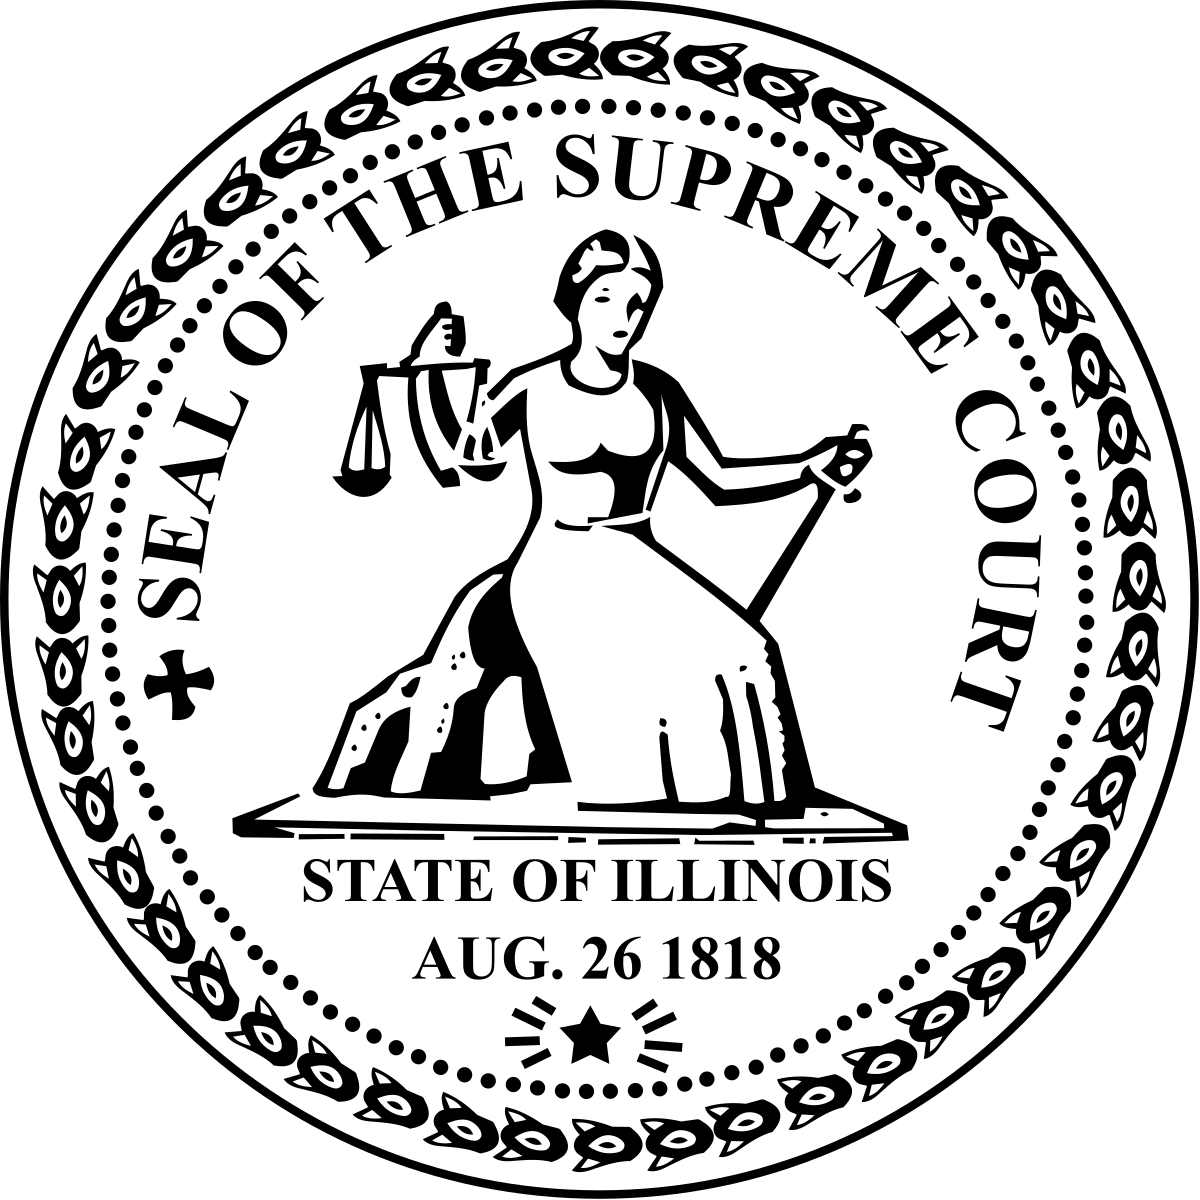 The Illinois Court System